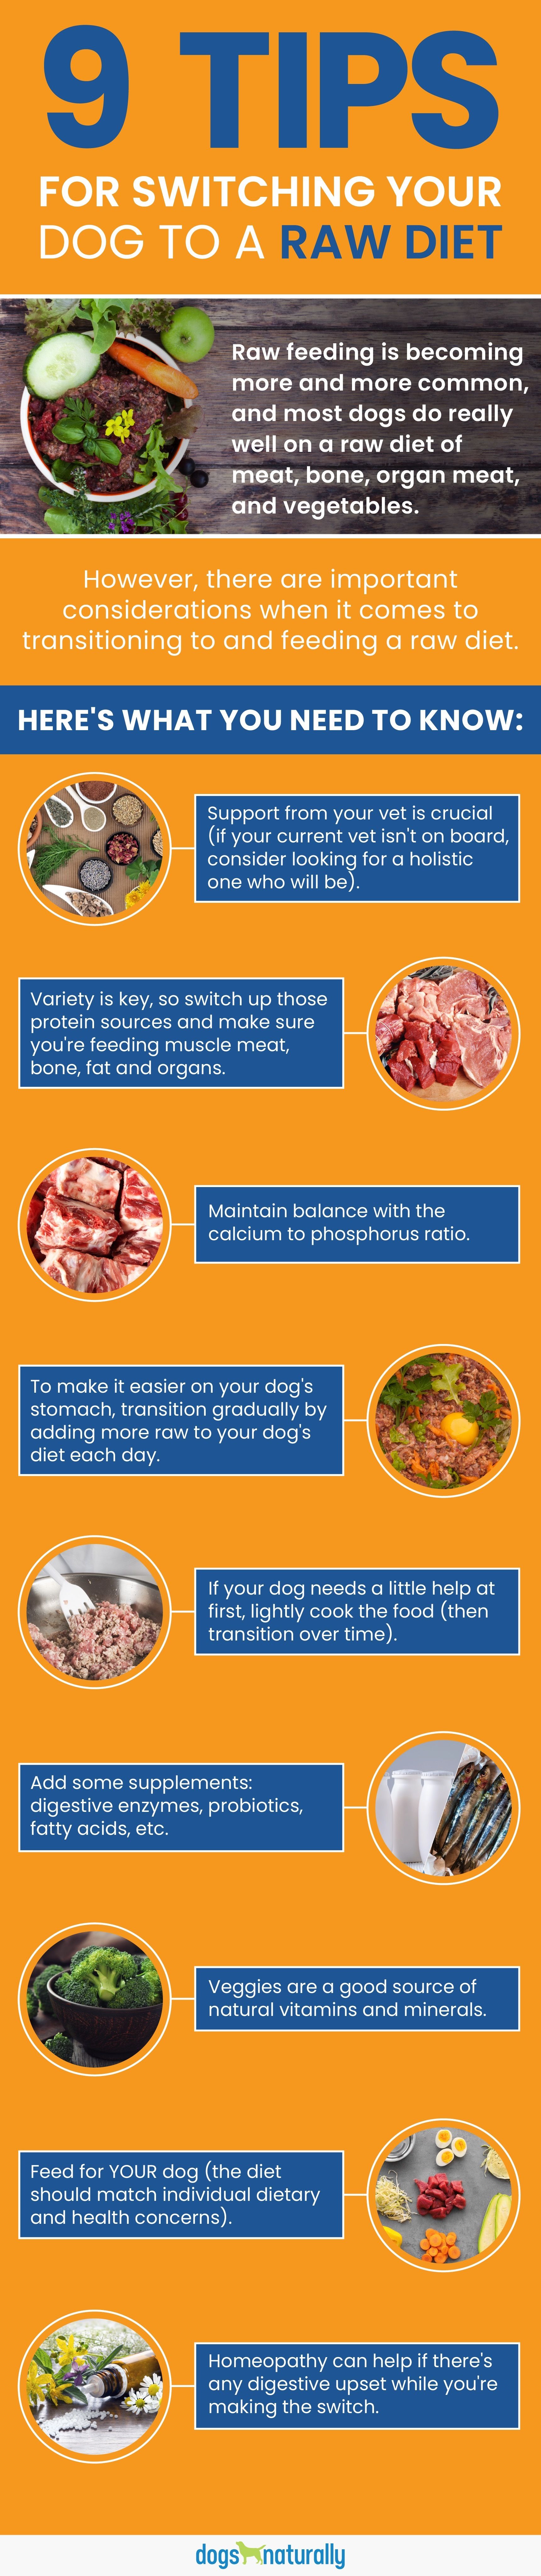 9 tips for switching your dog to a raw diet, what you need to know